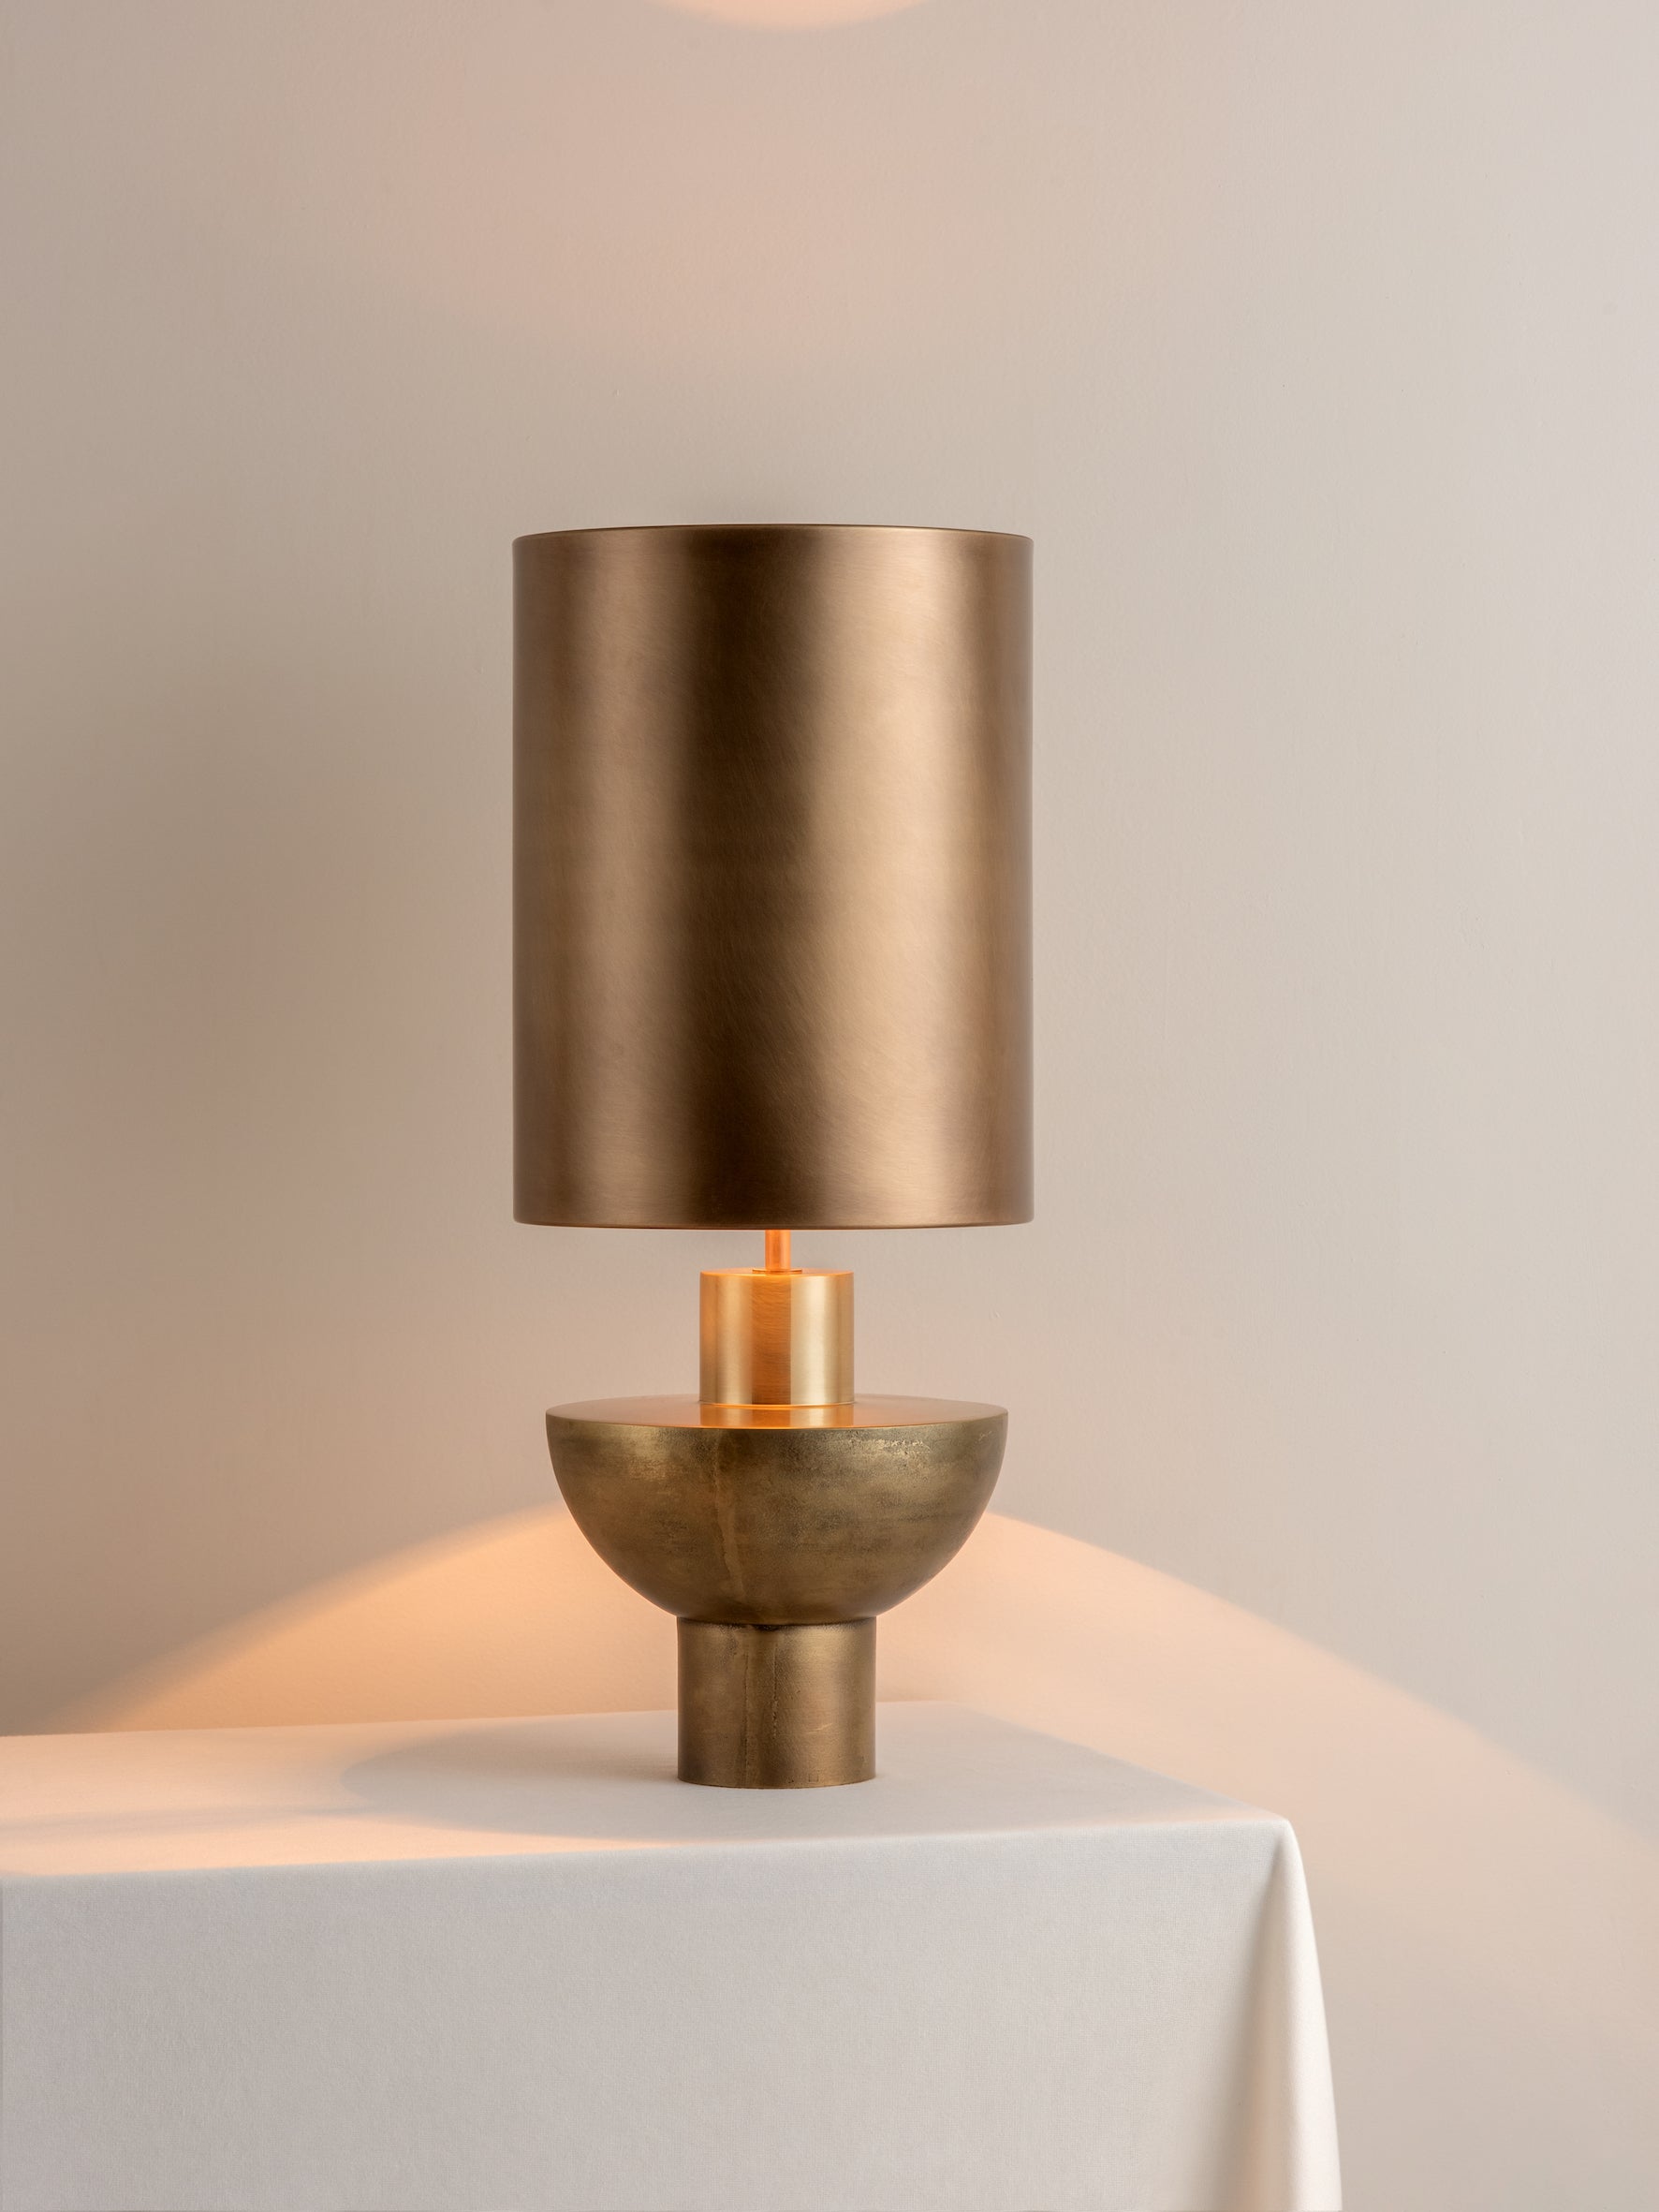 Editions brass lamp with + aged brass shade | Table Lamp | Lights & Lamps | UK | Modern Affordable Designer Lighting